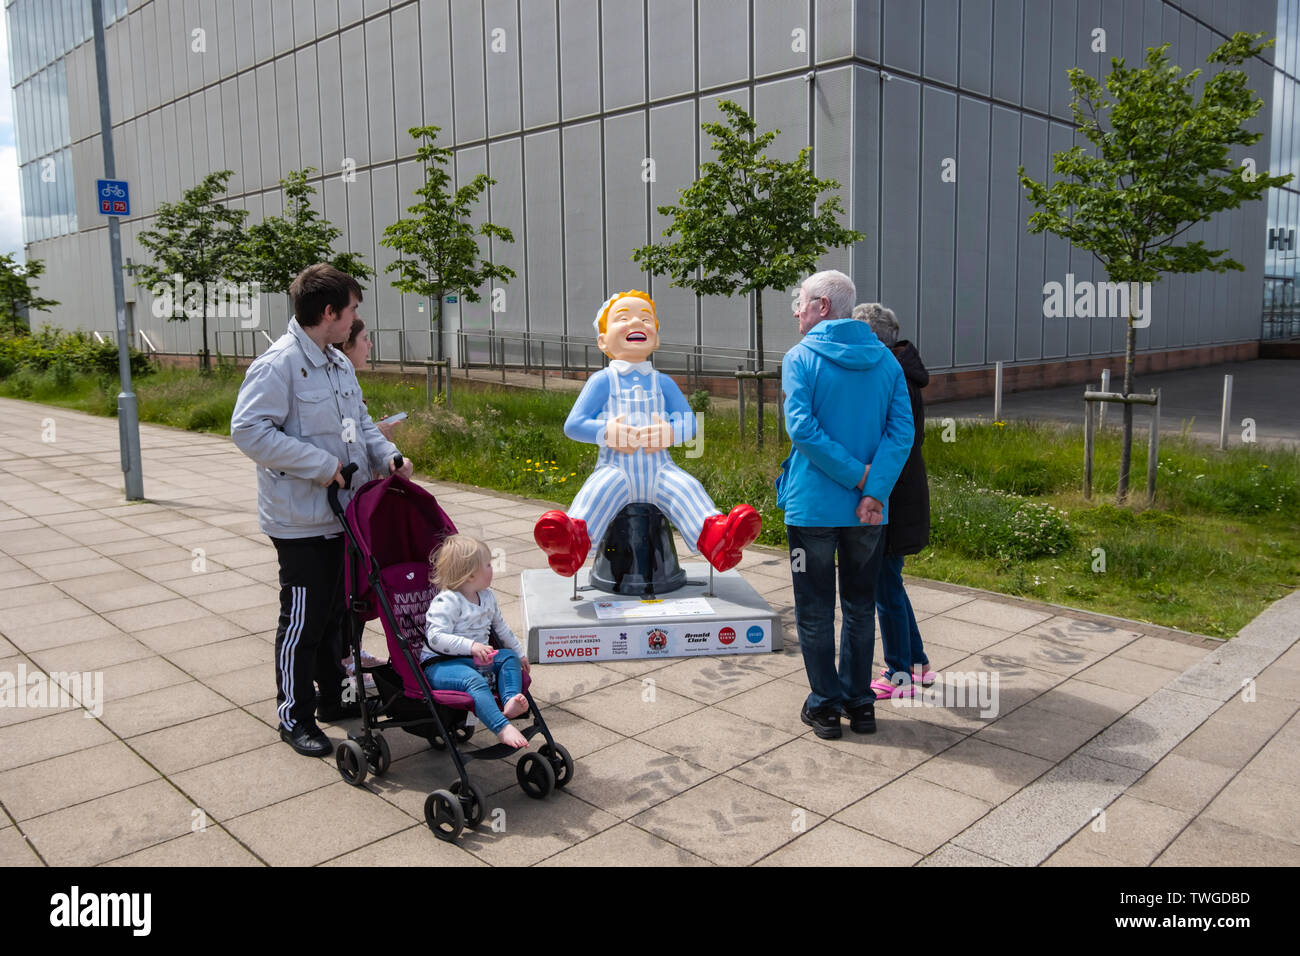 Glasgow, Scotland, UK. 20th June, 2019. Wee Wullie Winkie, created by David Graham. This sculpture is a refernce to the famous Scottish nursery rhyme Wee Willie Winkie written by Glasgwegian William Miller. It sees Oor Wullie dressed in his nightcap and pyjamas, sitting on his bucket, which depicts the Glasgow skyline at night. He is stretching his legs after waking from a  long night's sleep. The sculpture is part of Oor Wullie’s BIG Bucket Trail. Credit: Skully/Alamy Live News Stock Photo